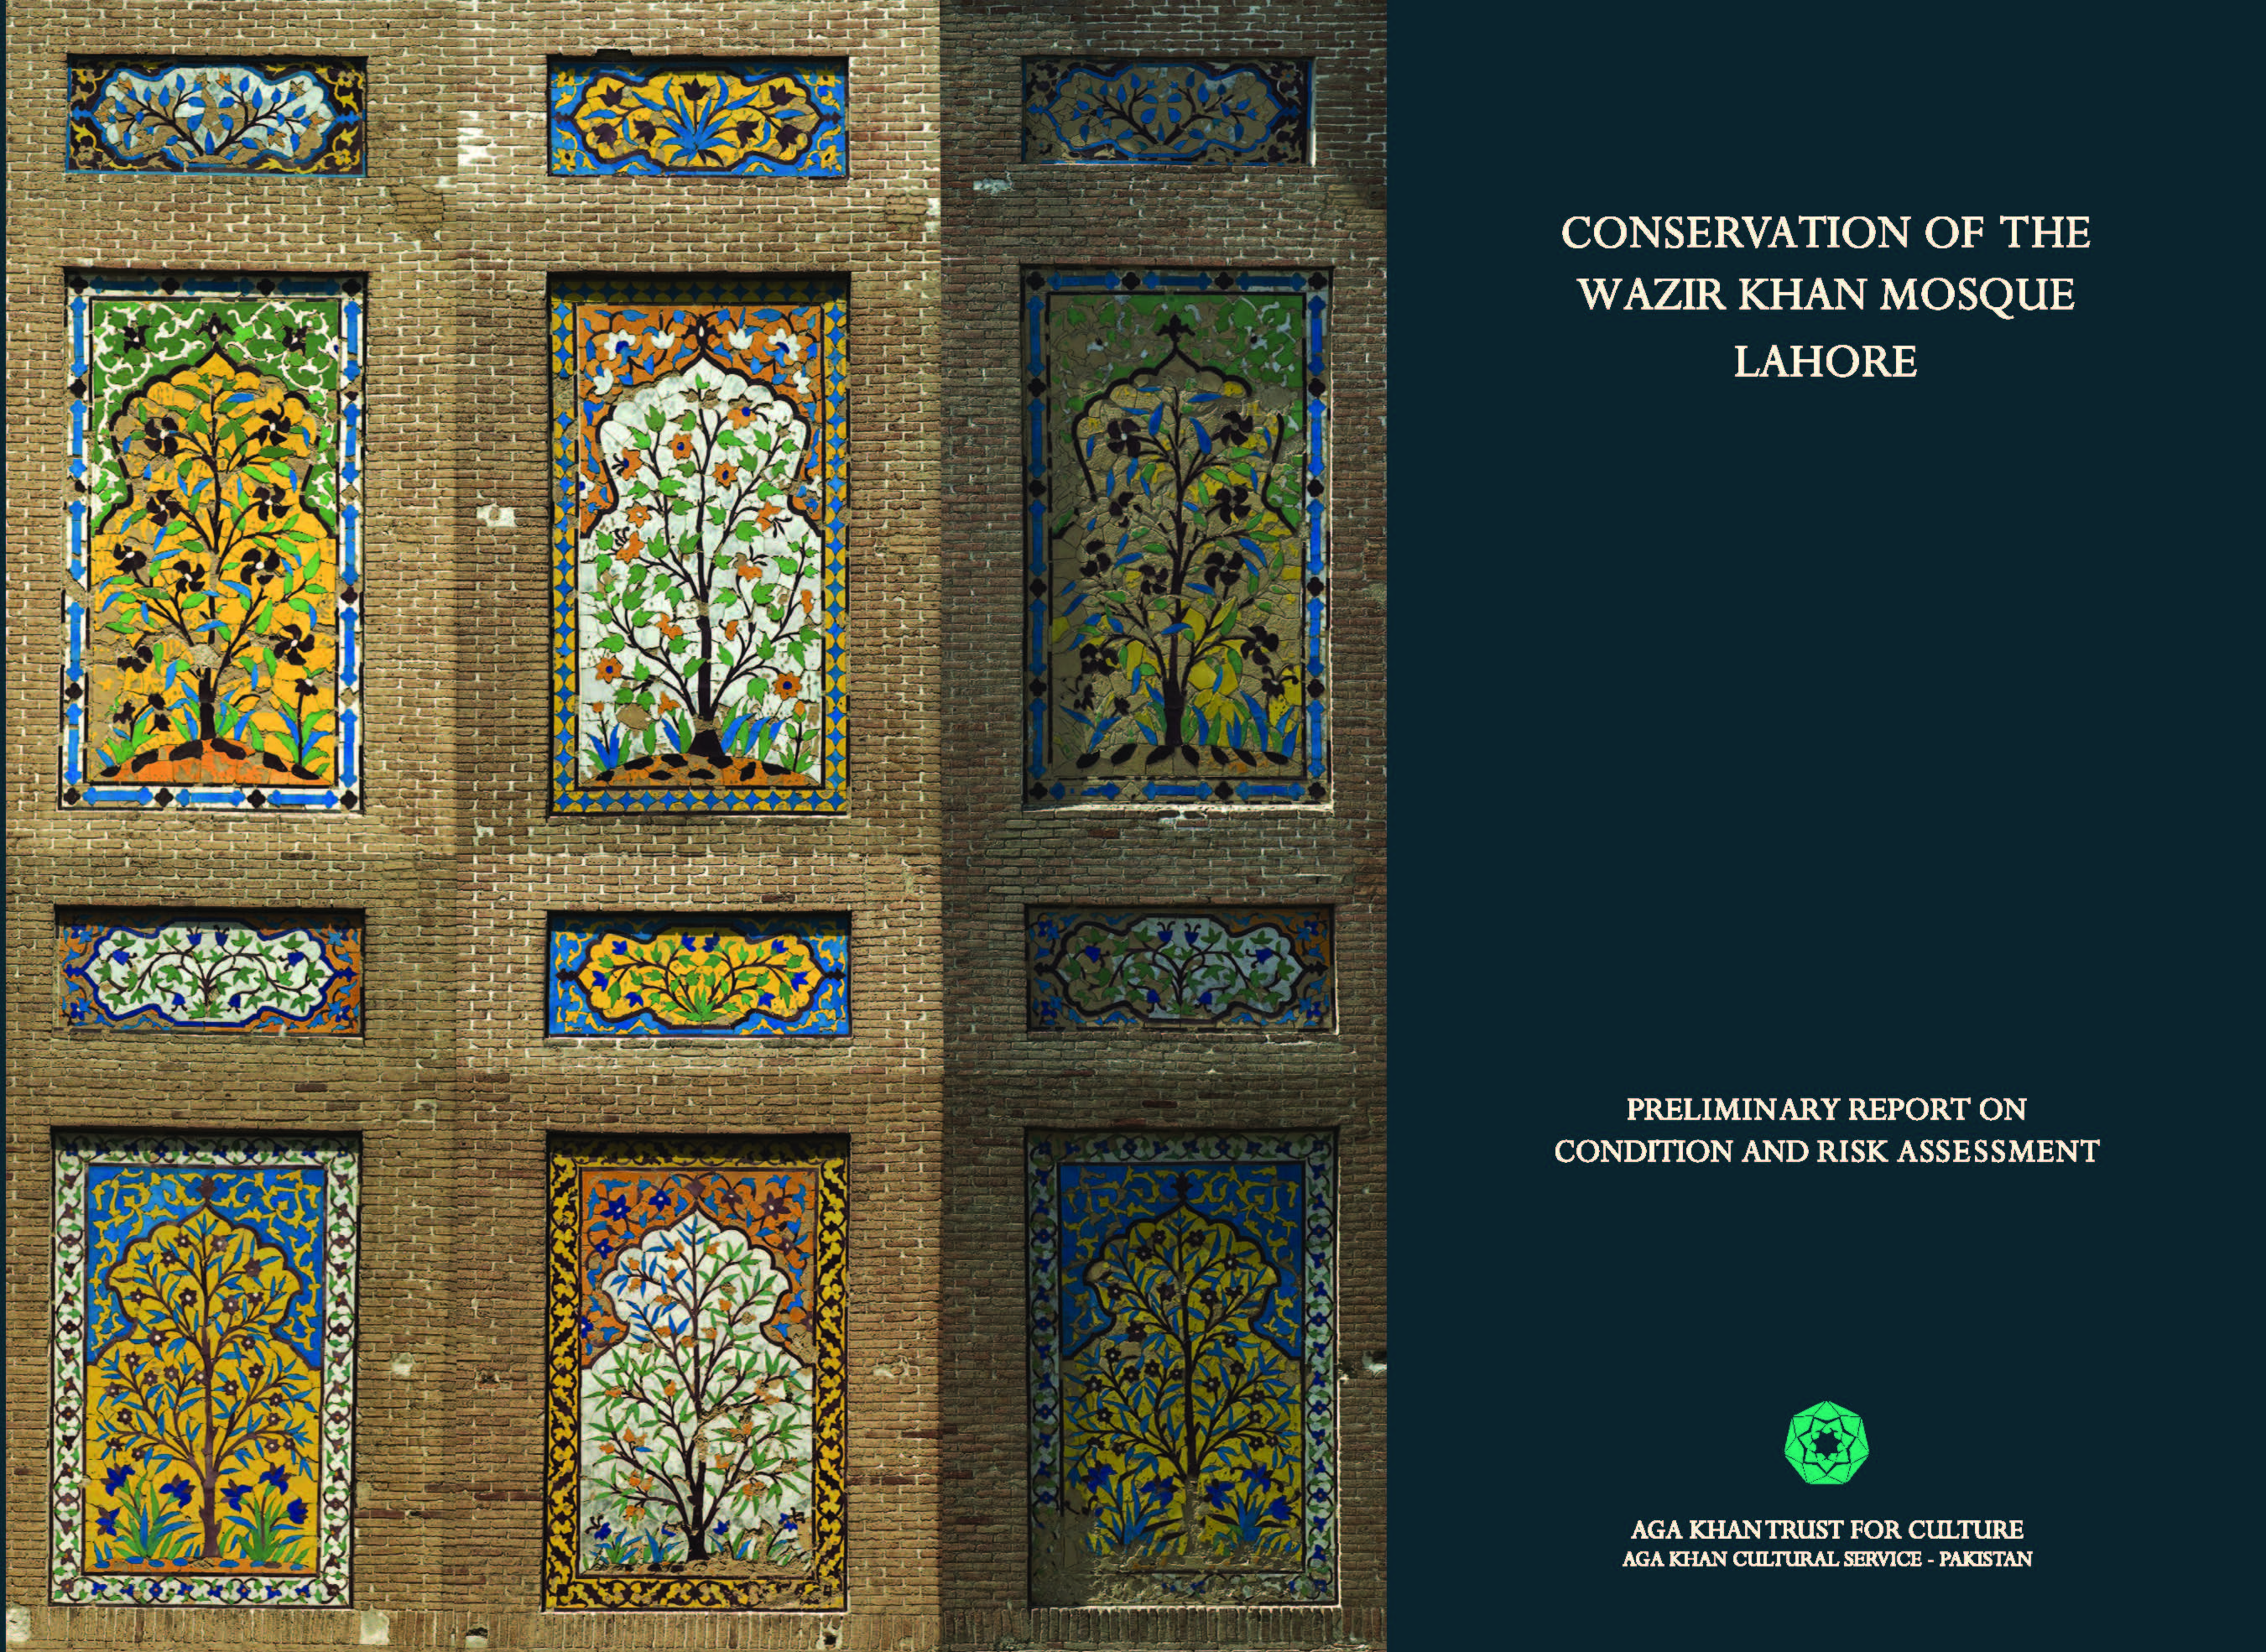 Conservation of the Wazir Khan Mosque Lahore: Preliminary Report on Condition and Risk Assessment